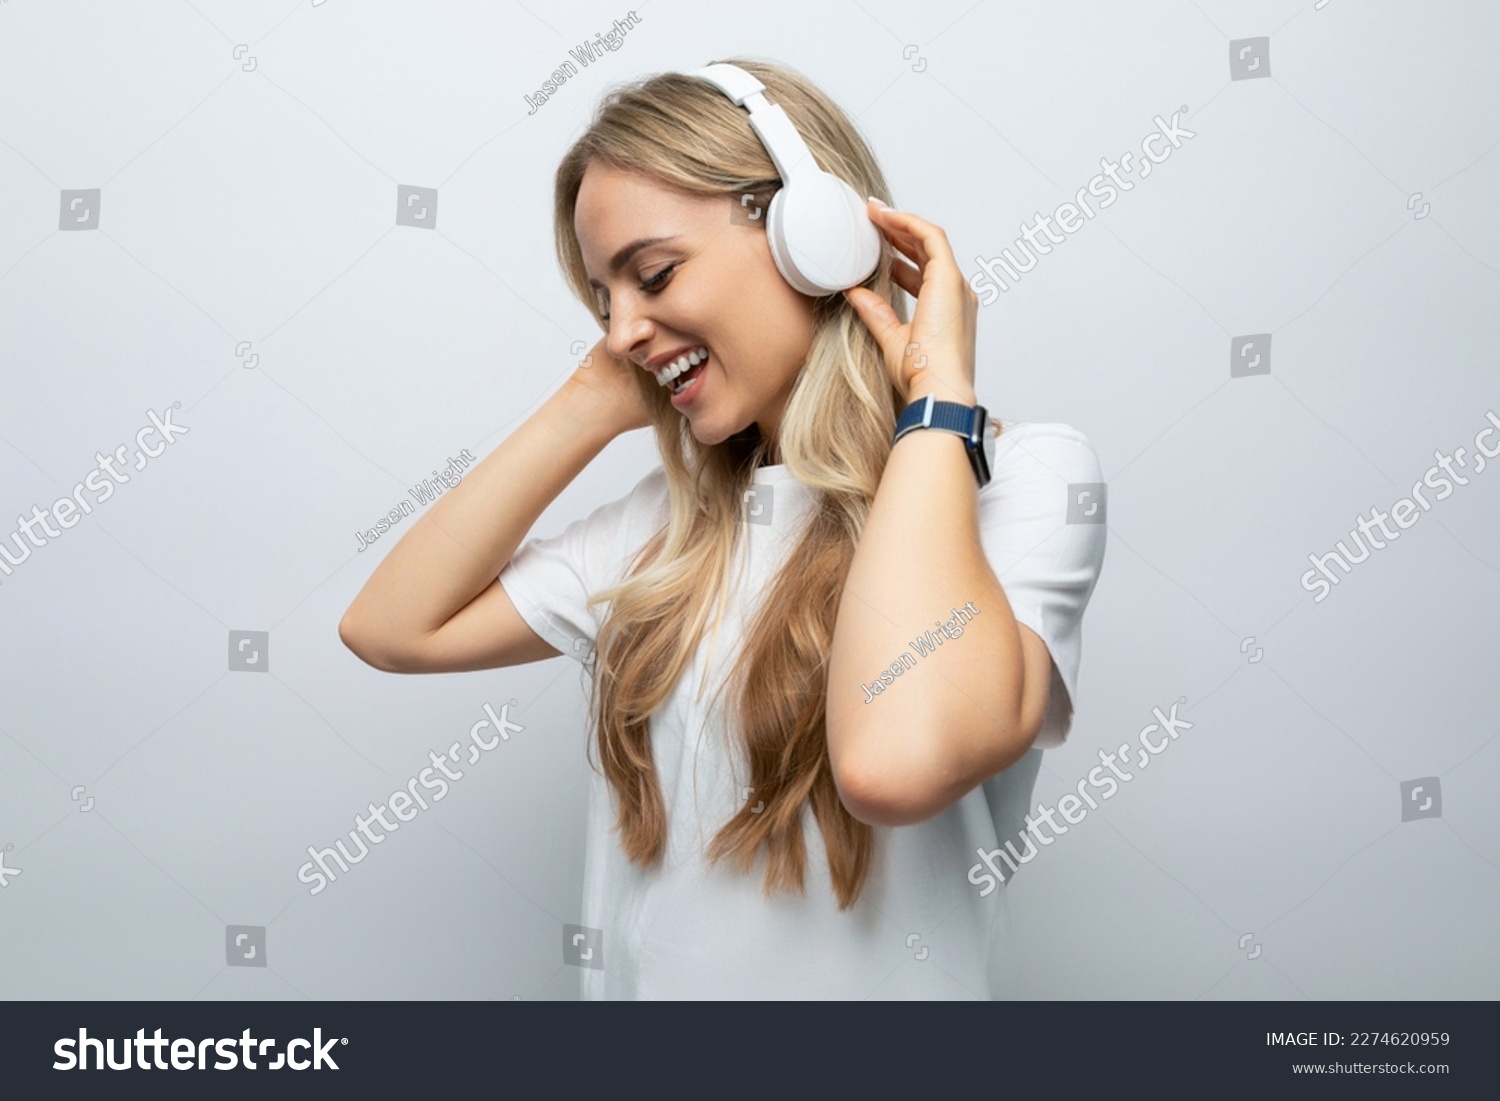 romantic woman sings along to music from headphones among white background #2274620959